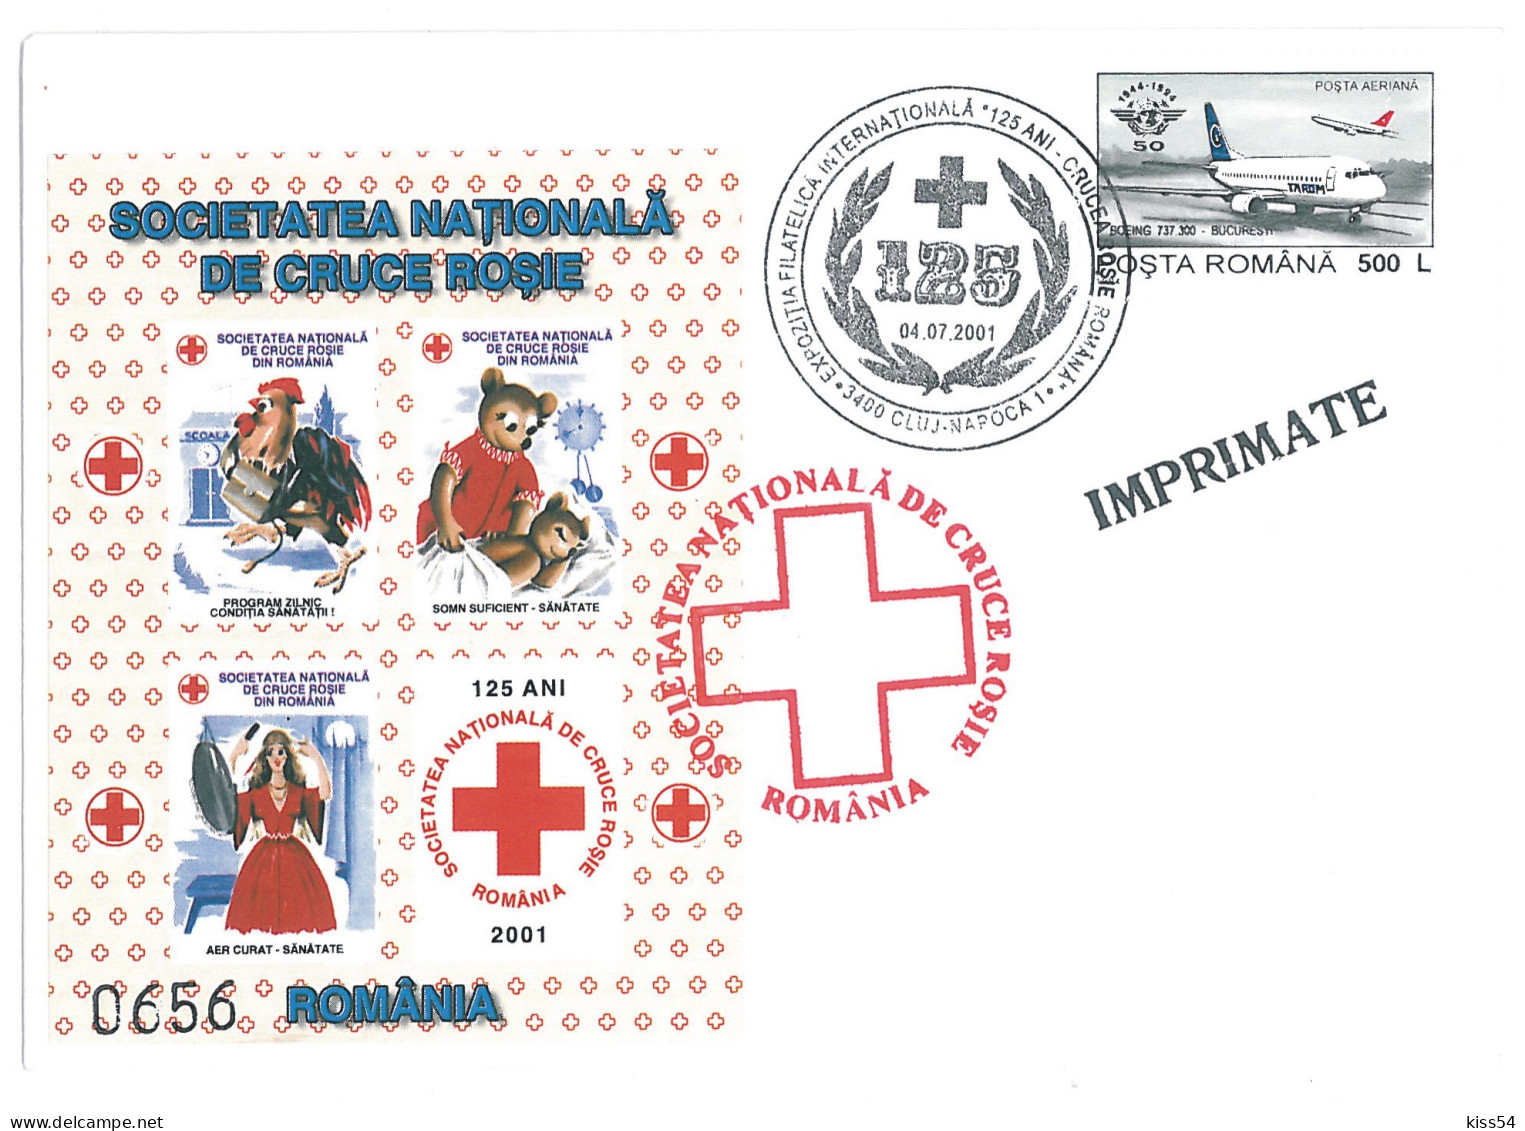 COV 87 - 306 RED CROSS, Romania - Cover - Used - 2005 - Maximum Cards & Covers